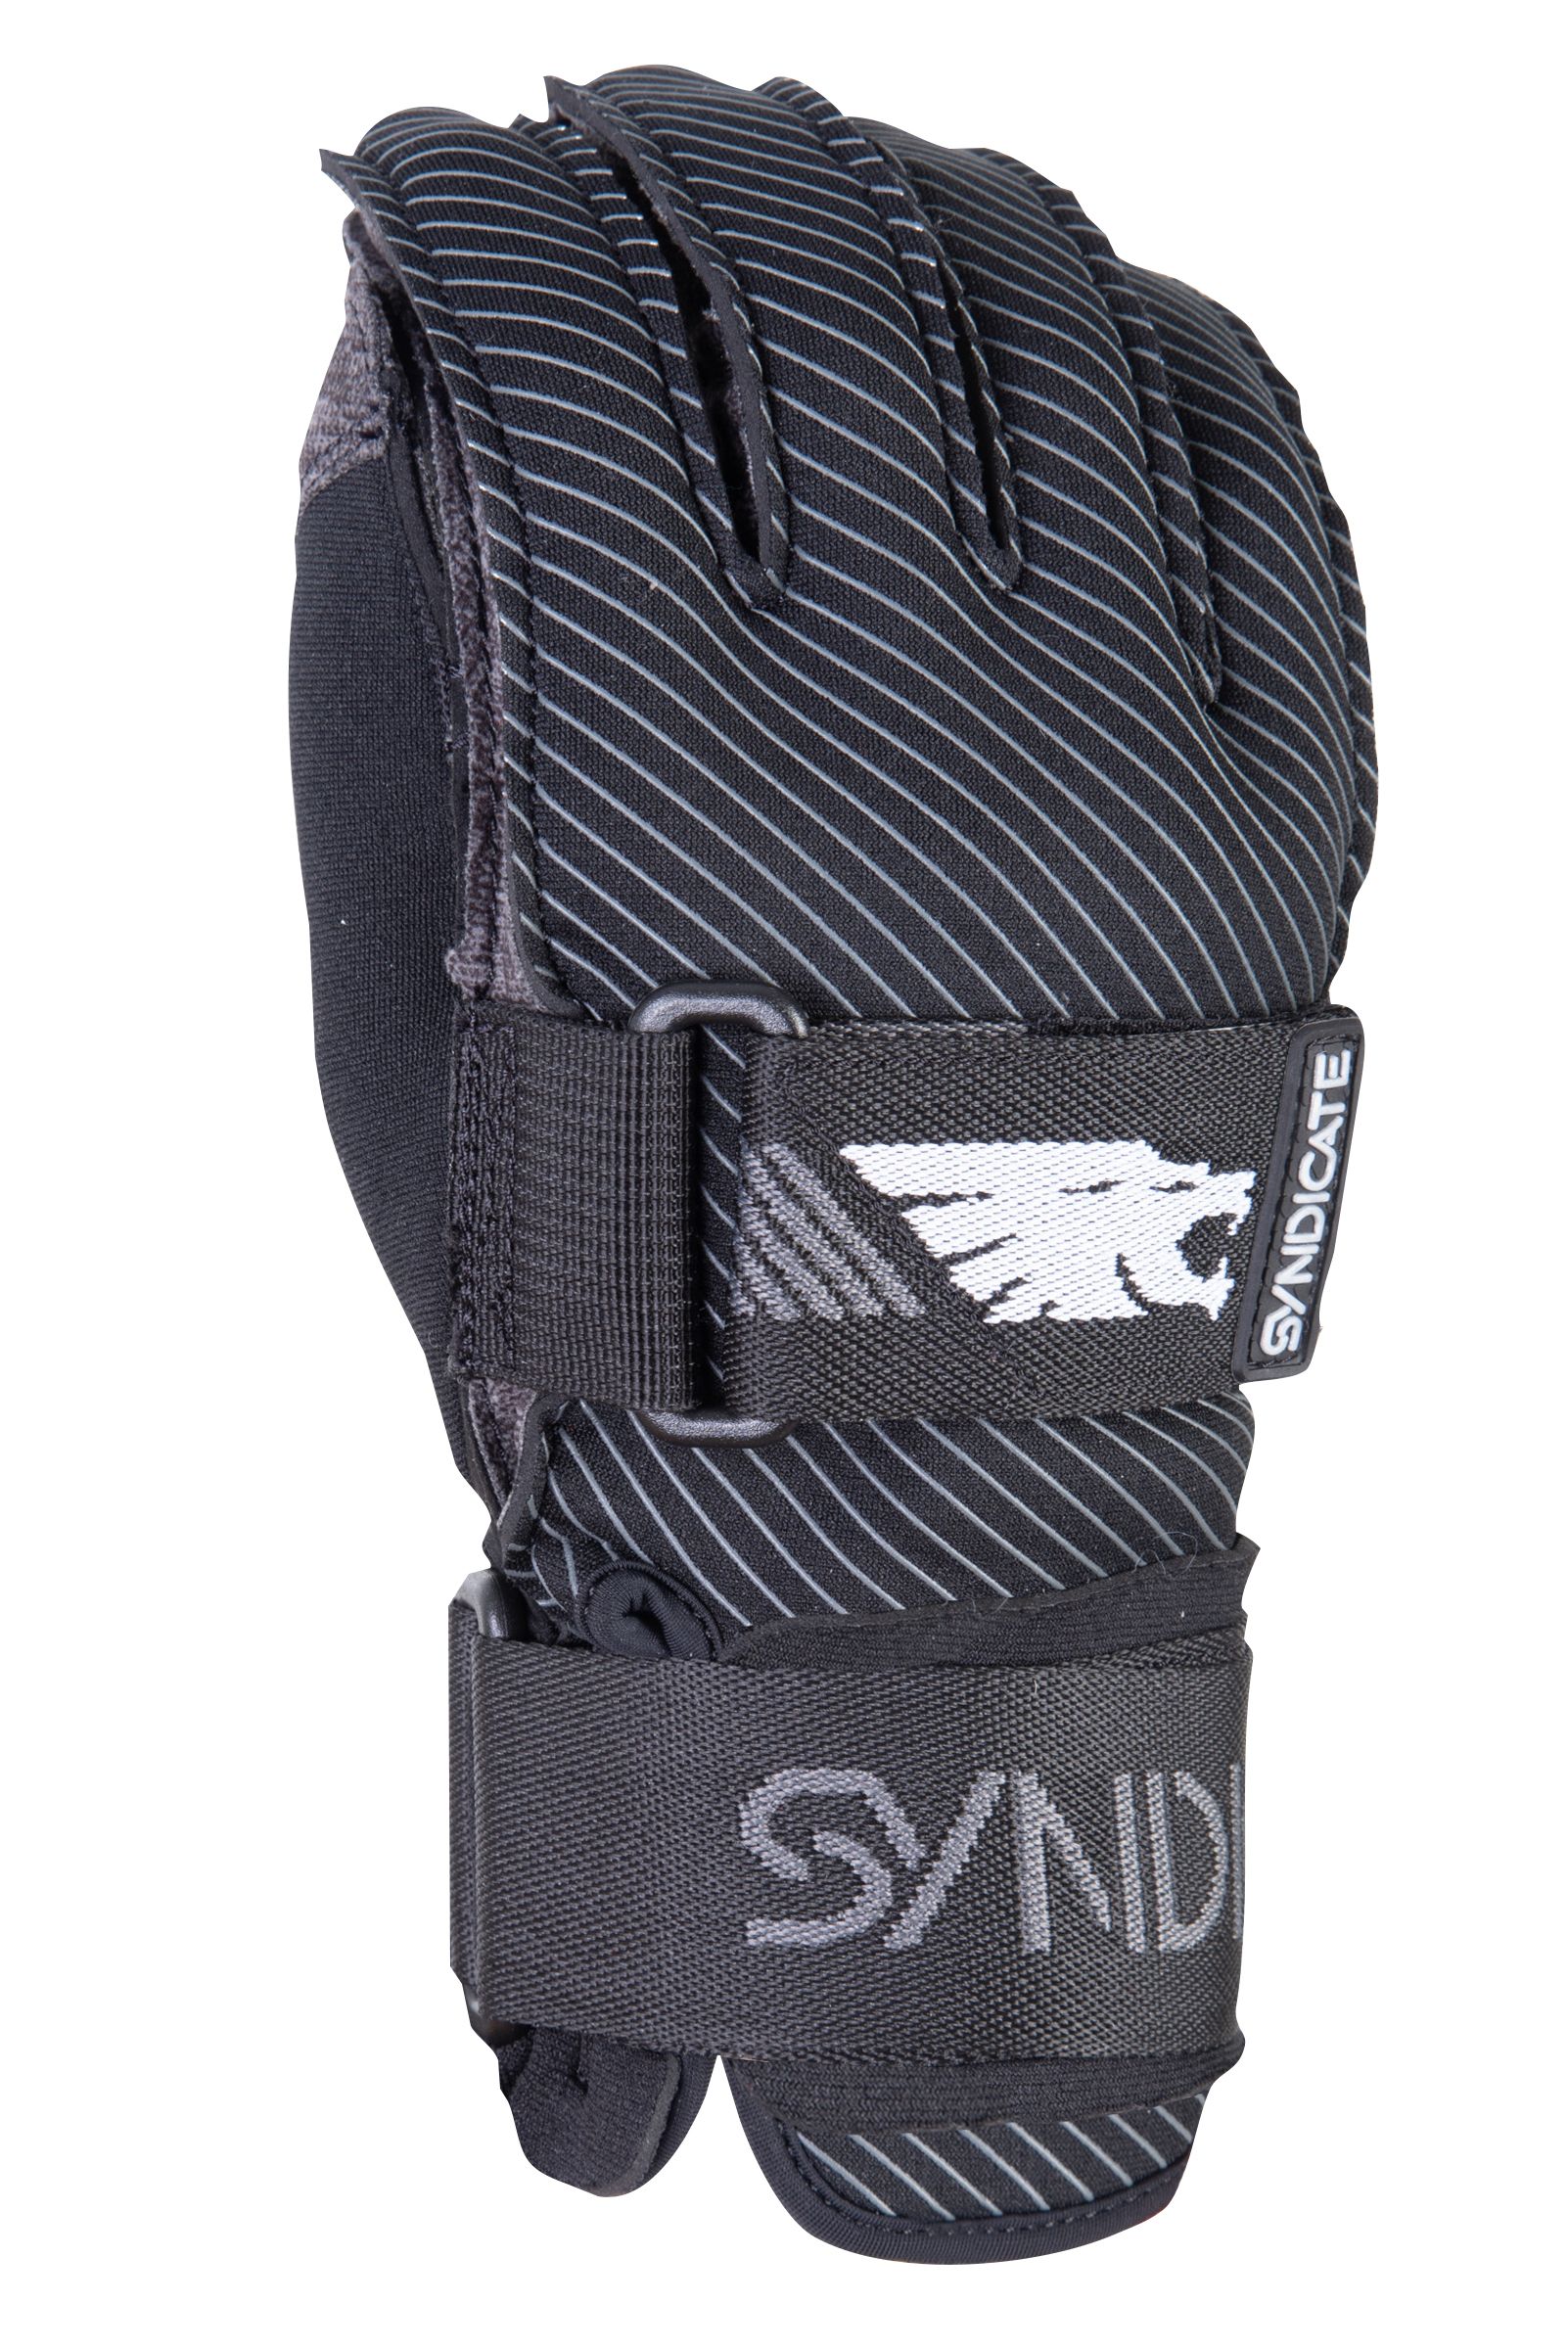 HO SYNDICATE GLOVE 41 TAIL - INSIDE OUT GLOVE - XL